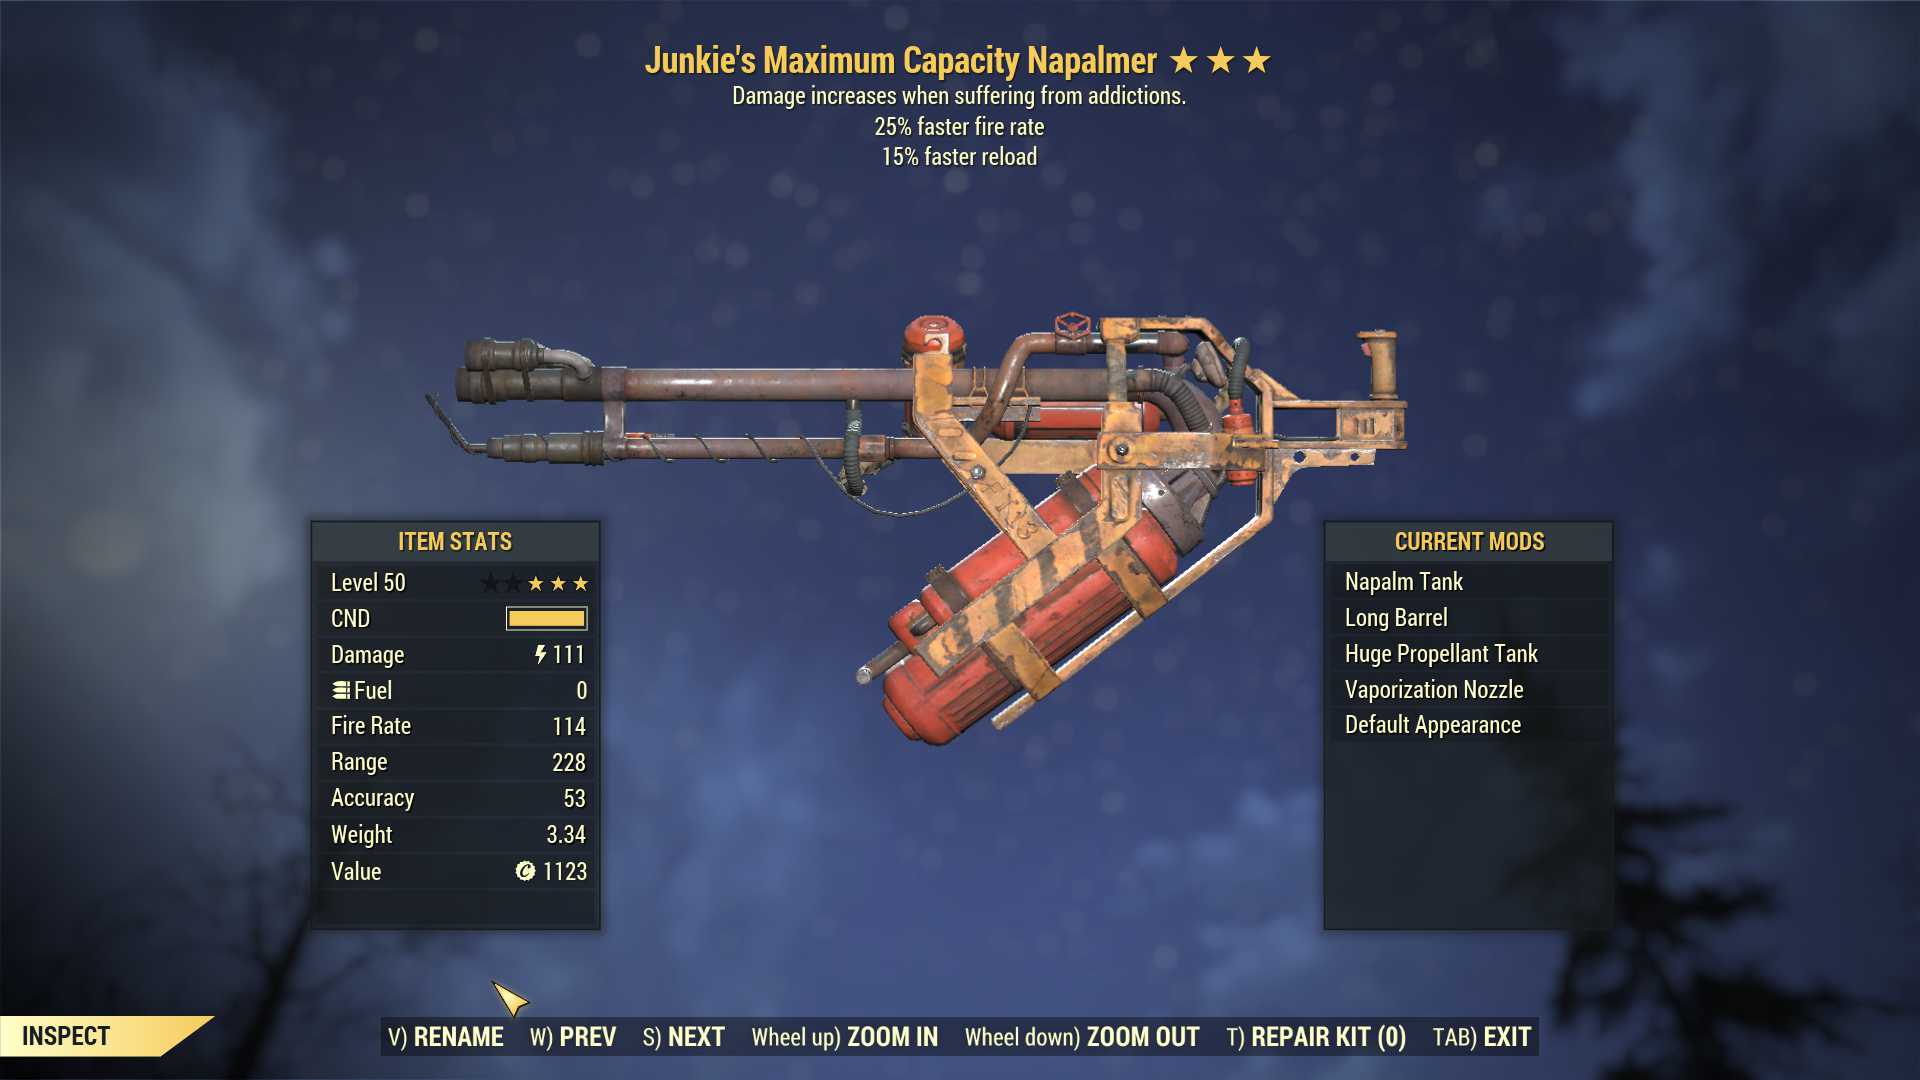 Junkie's Flamer (25% faster fire rate, 15% faster reload)